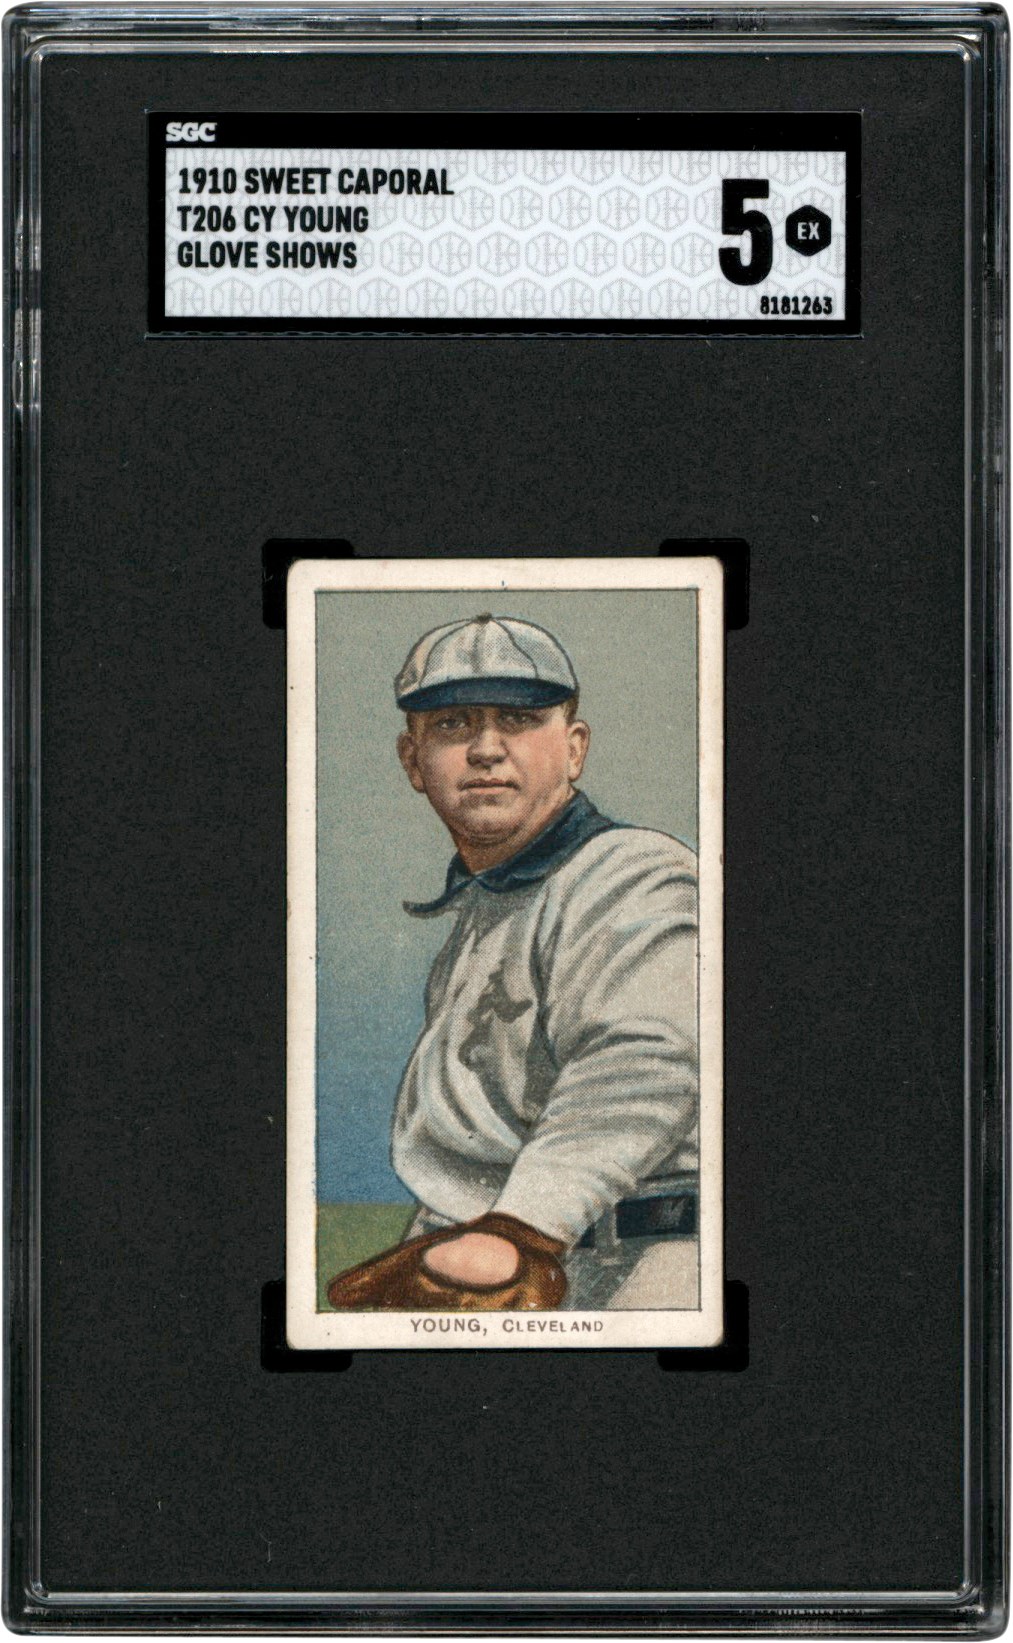 - 909-1911 T206 Cy Young Sweet Caporal (Glove Shows) SGC EX 5